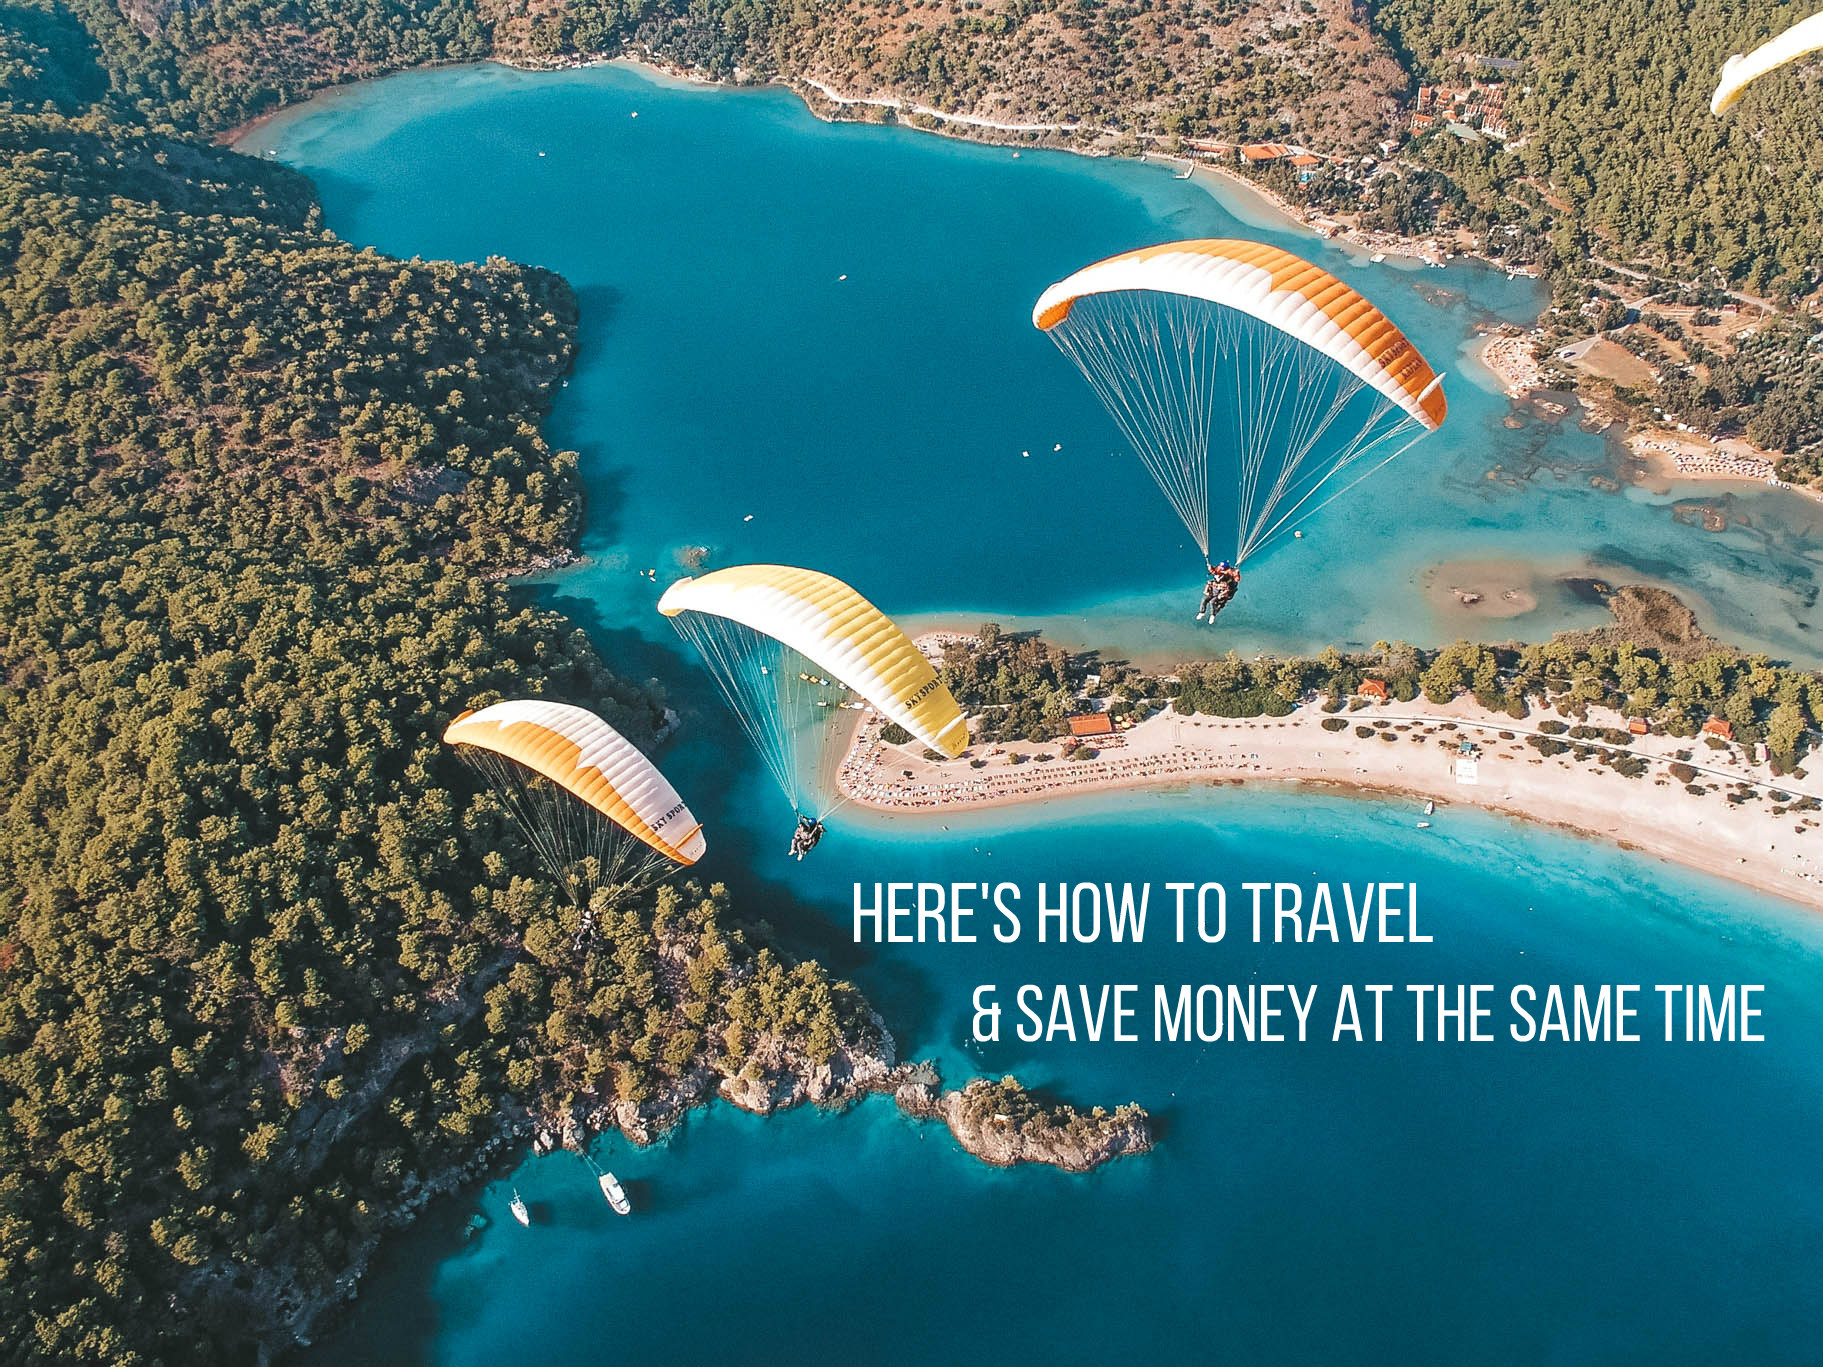 HERE’S HOW TO TRAVEL AND SAVE MONEY AT THE SAME TIME